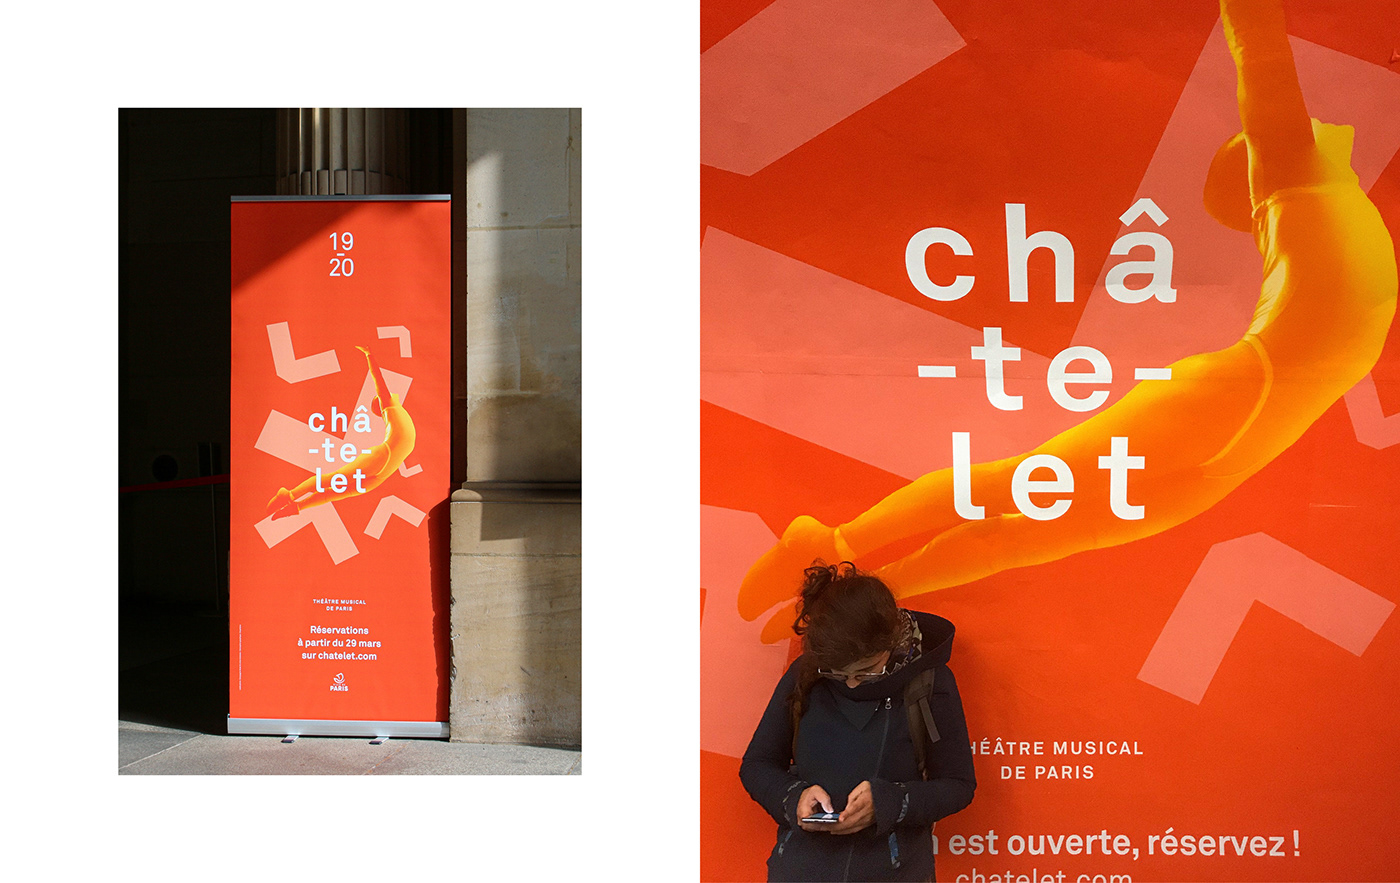 logo theater  music culture Paris branding  typography   poster france chatelet